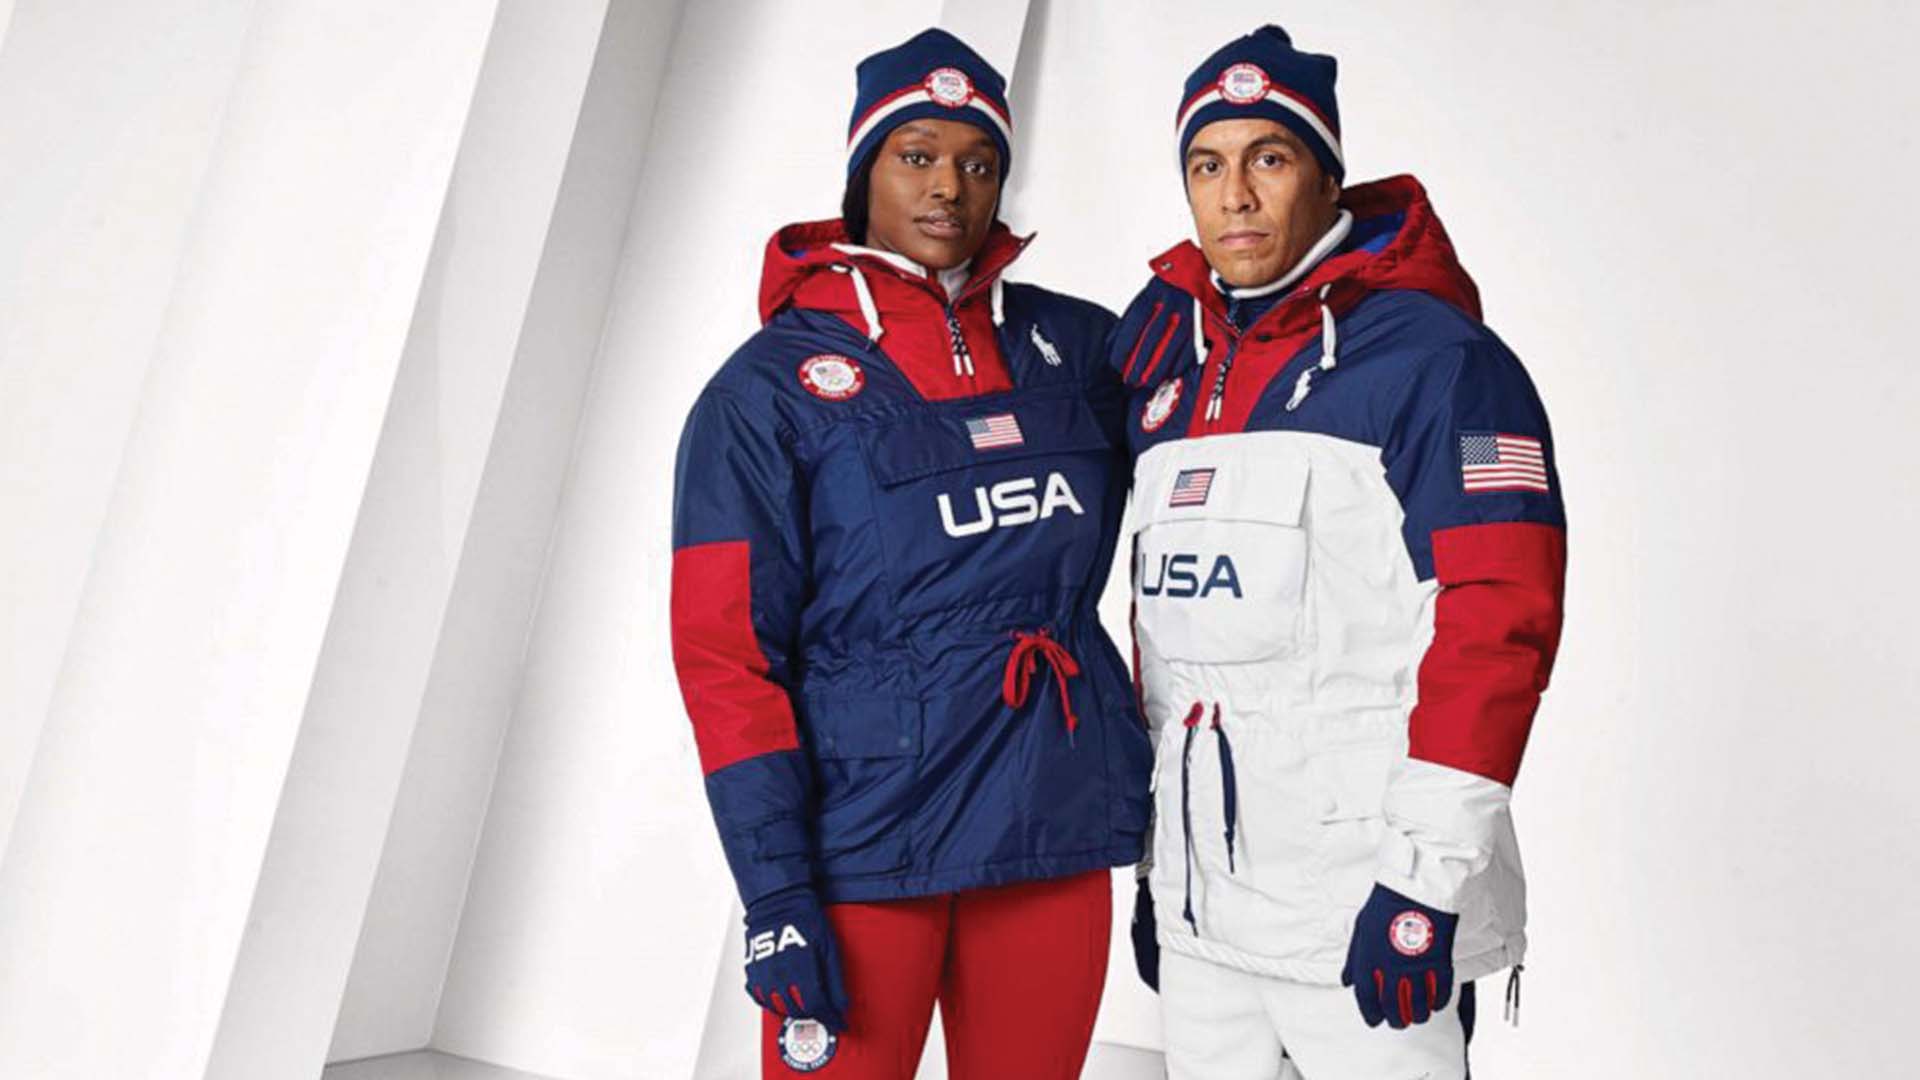 Ralph Lauren's Team USA opening ceremony sustainability and innovative uniformts